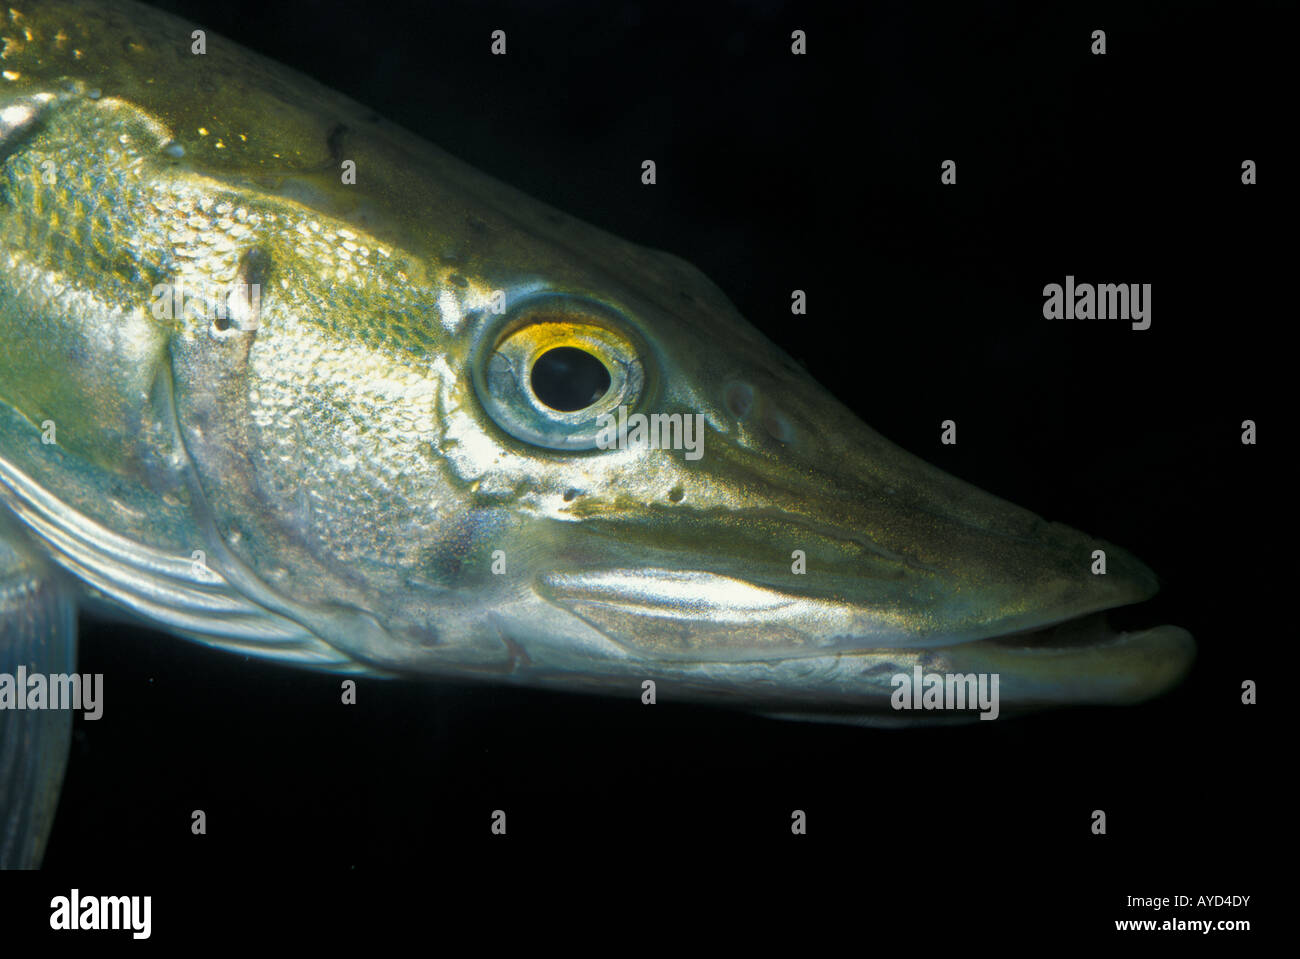 Esox lucius, pike fish, Esocidae Stock Photo